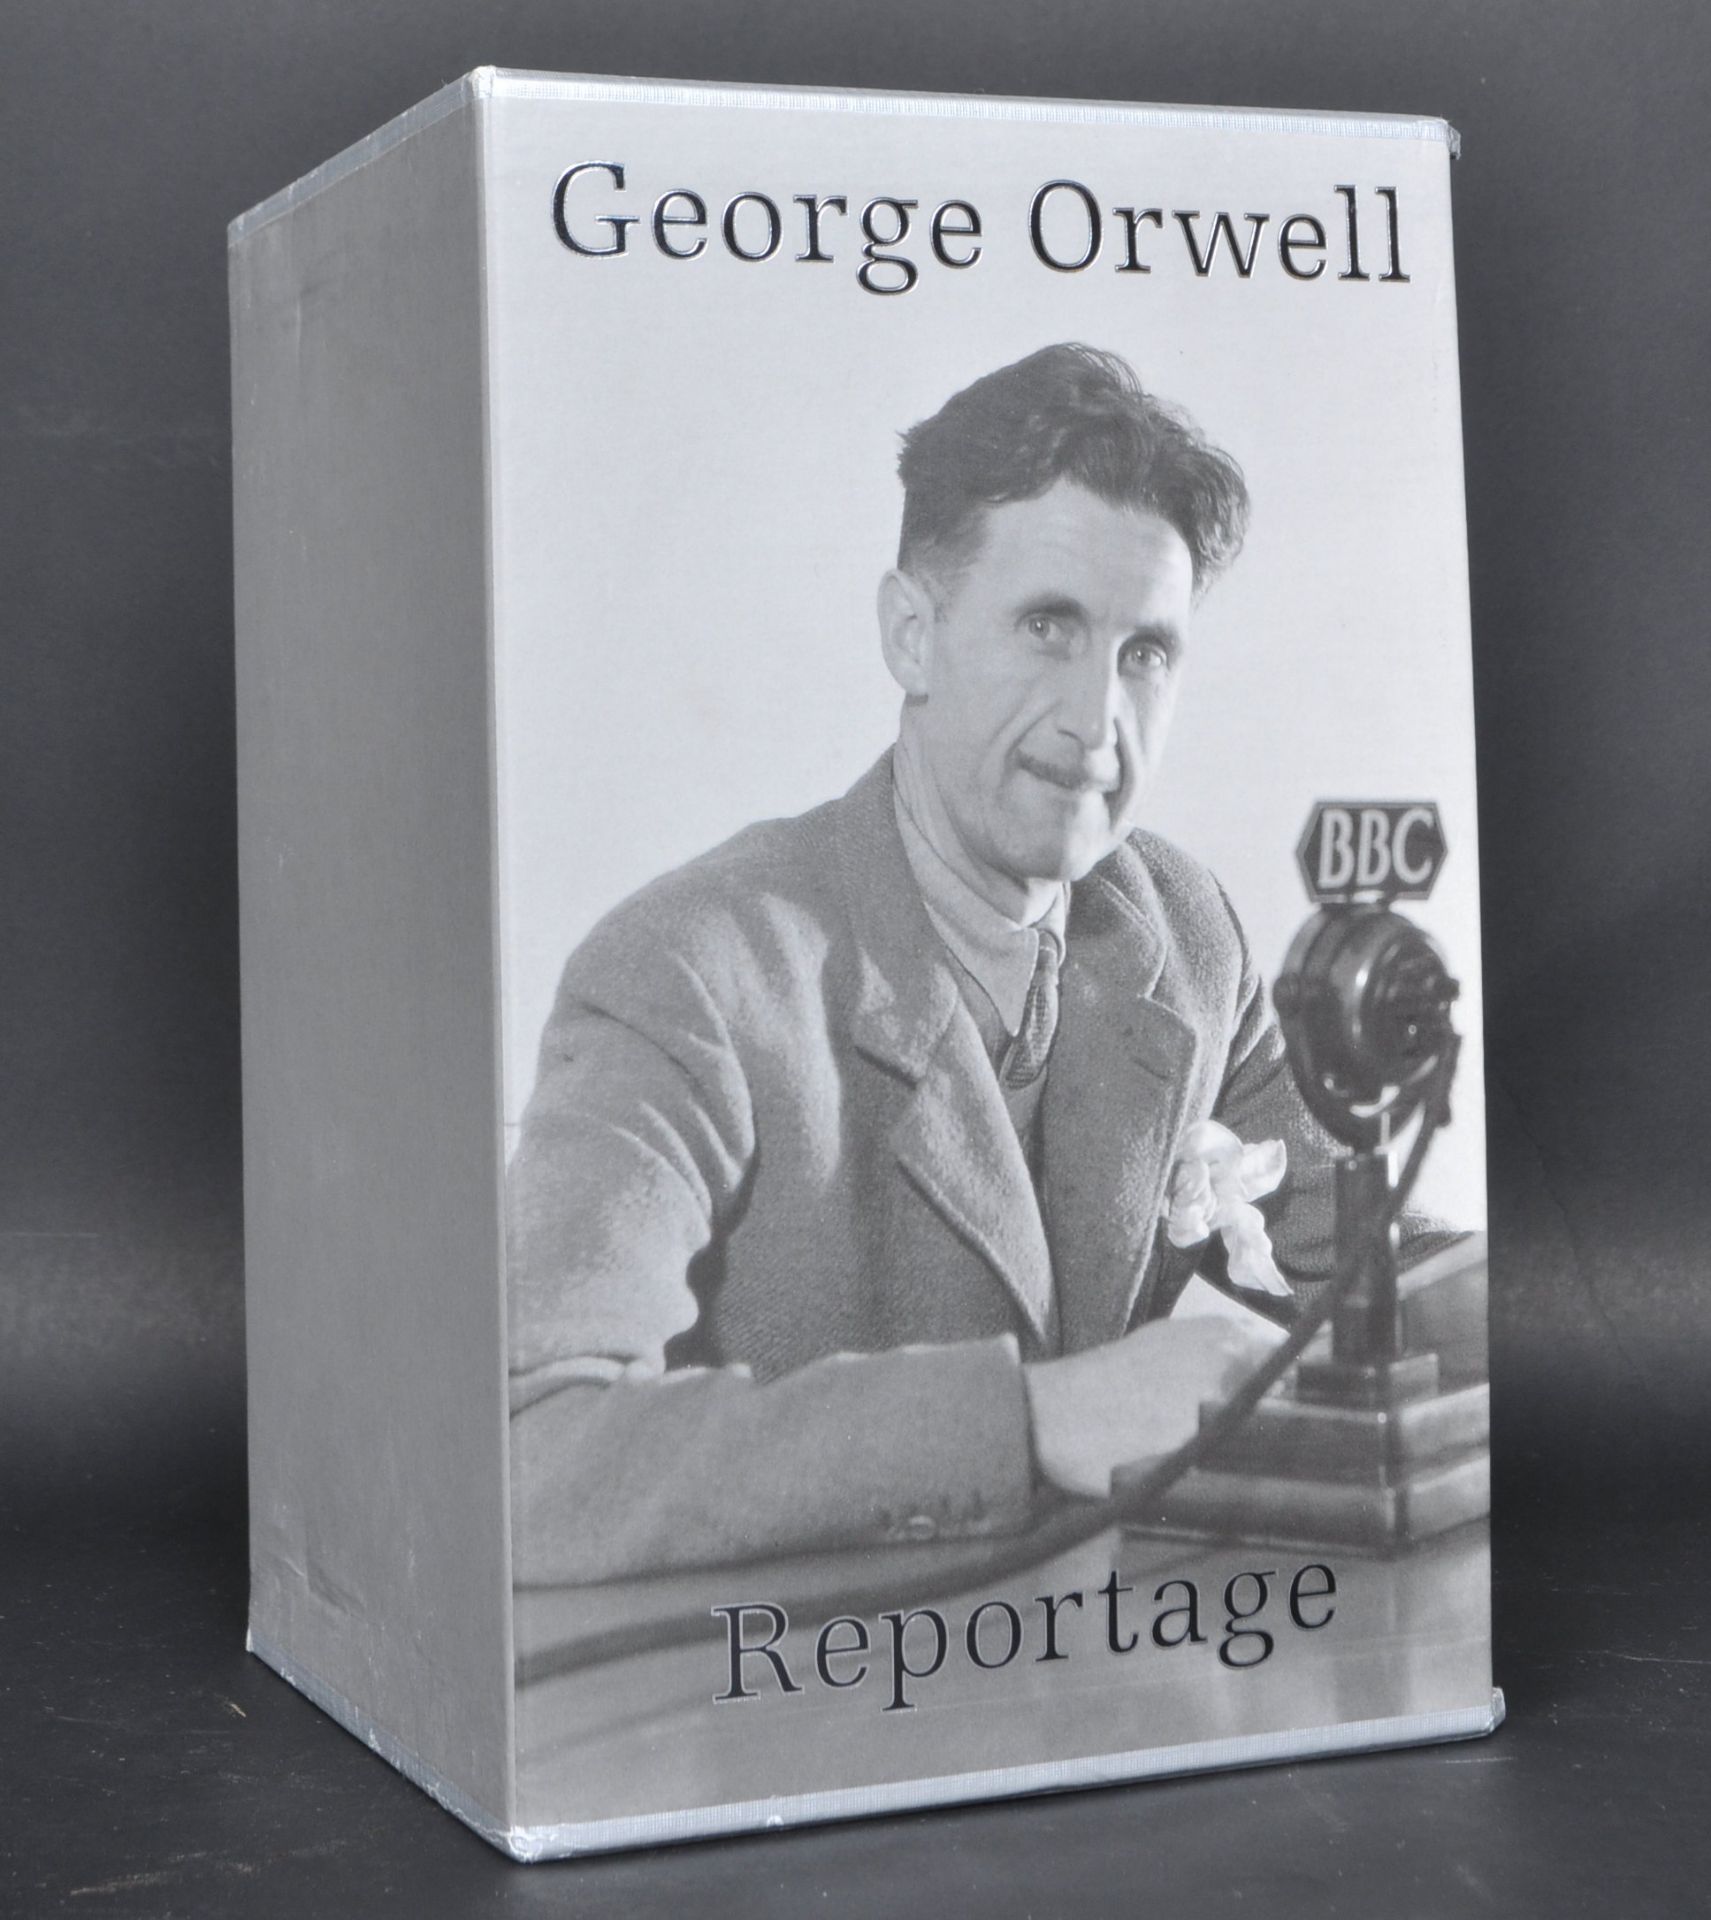 FOLIO SOCIETY GEORGE ORWELL HARDCOVER COLLECTION OF BOOKS - Image 2 of 7